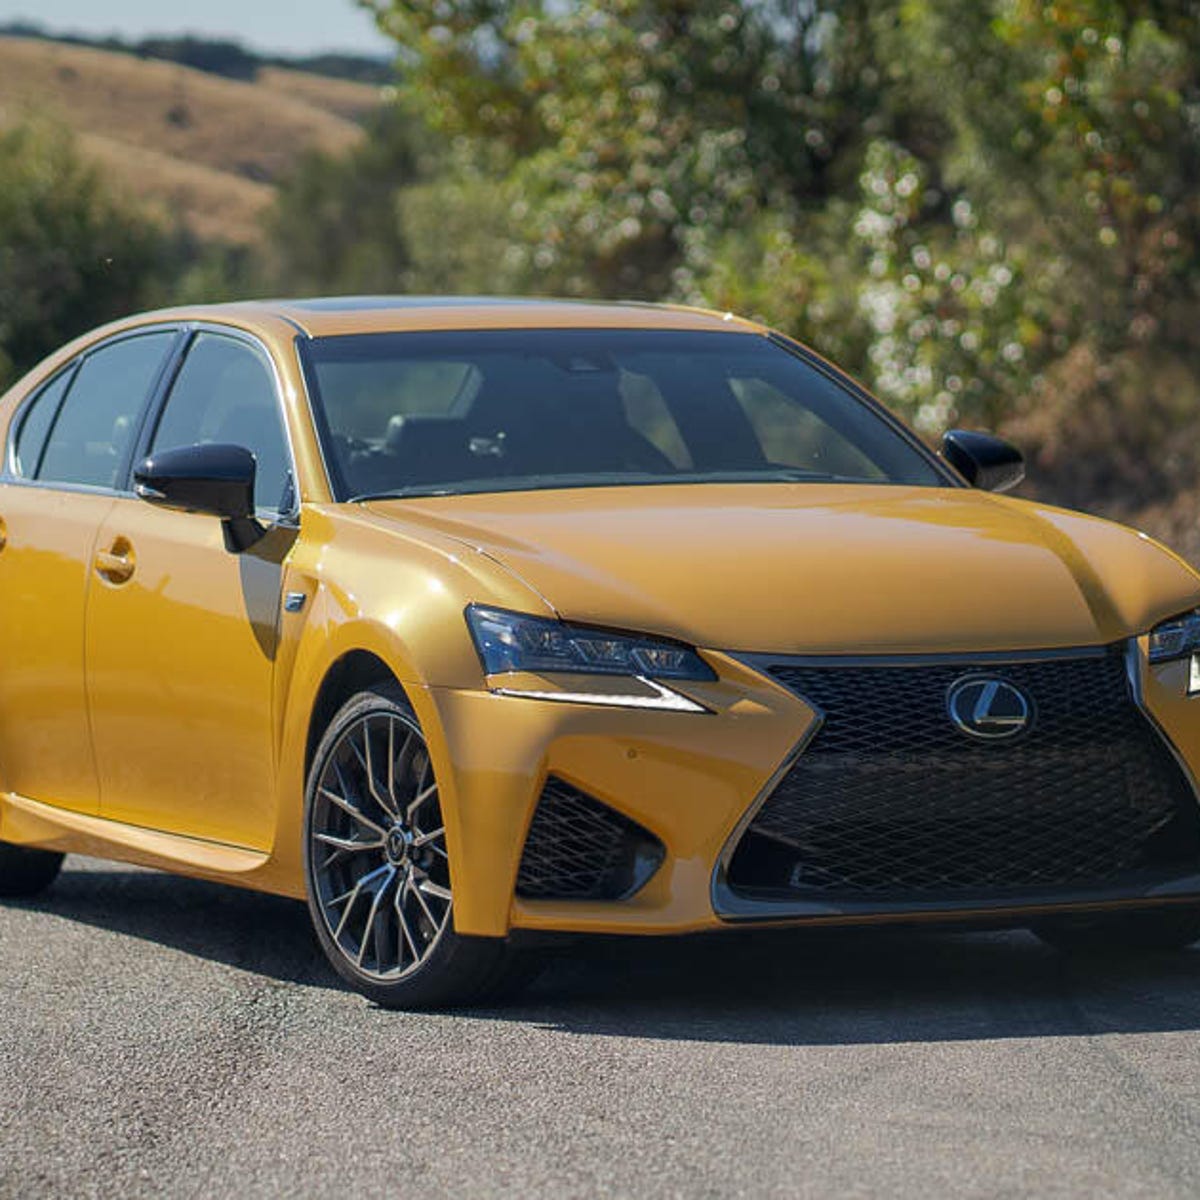 2020 Lexus GS F review: So good, but far from the best - CNET